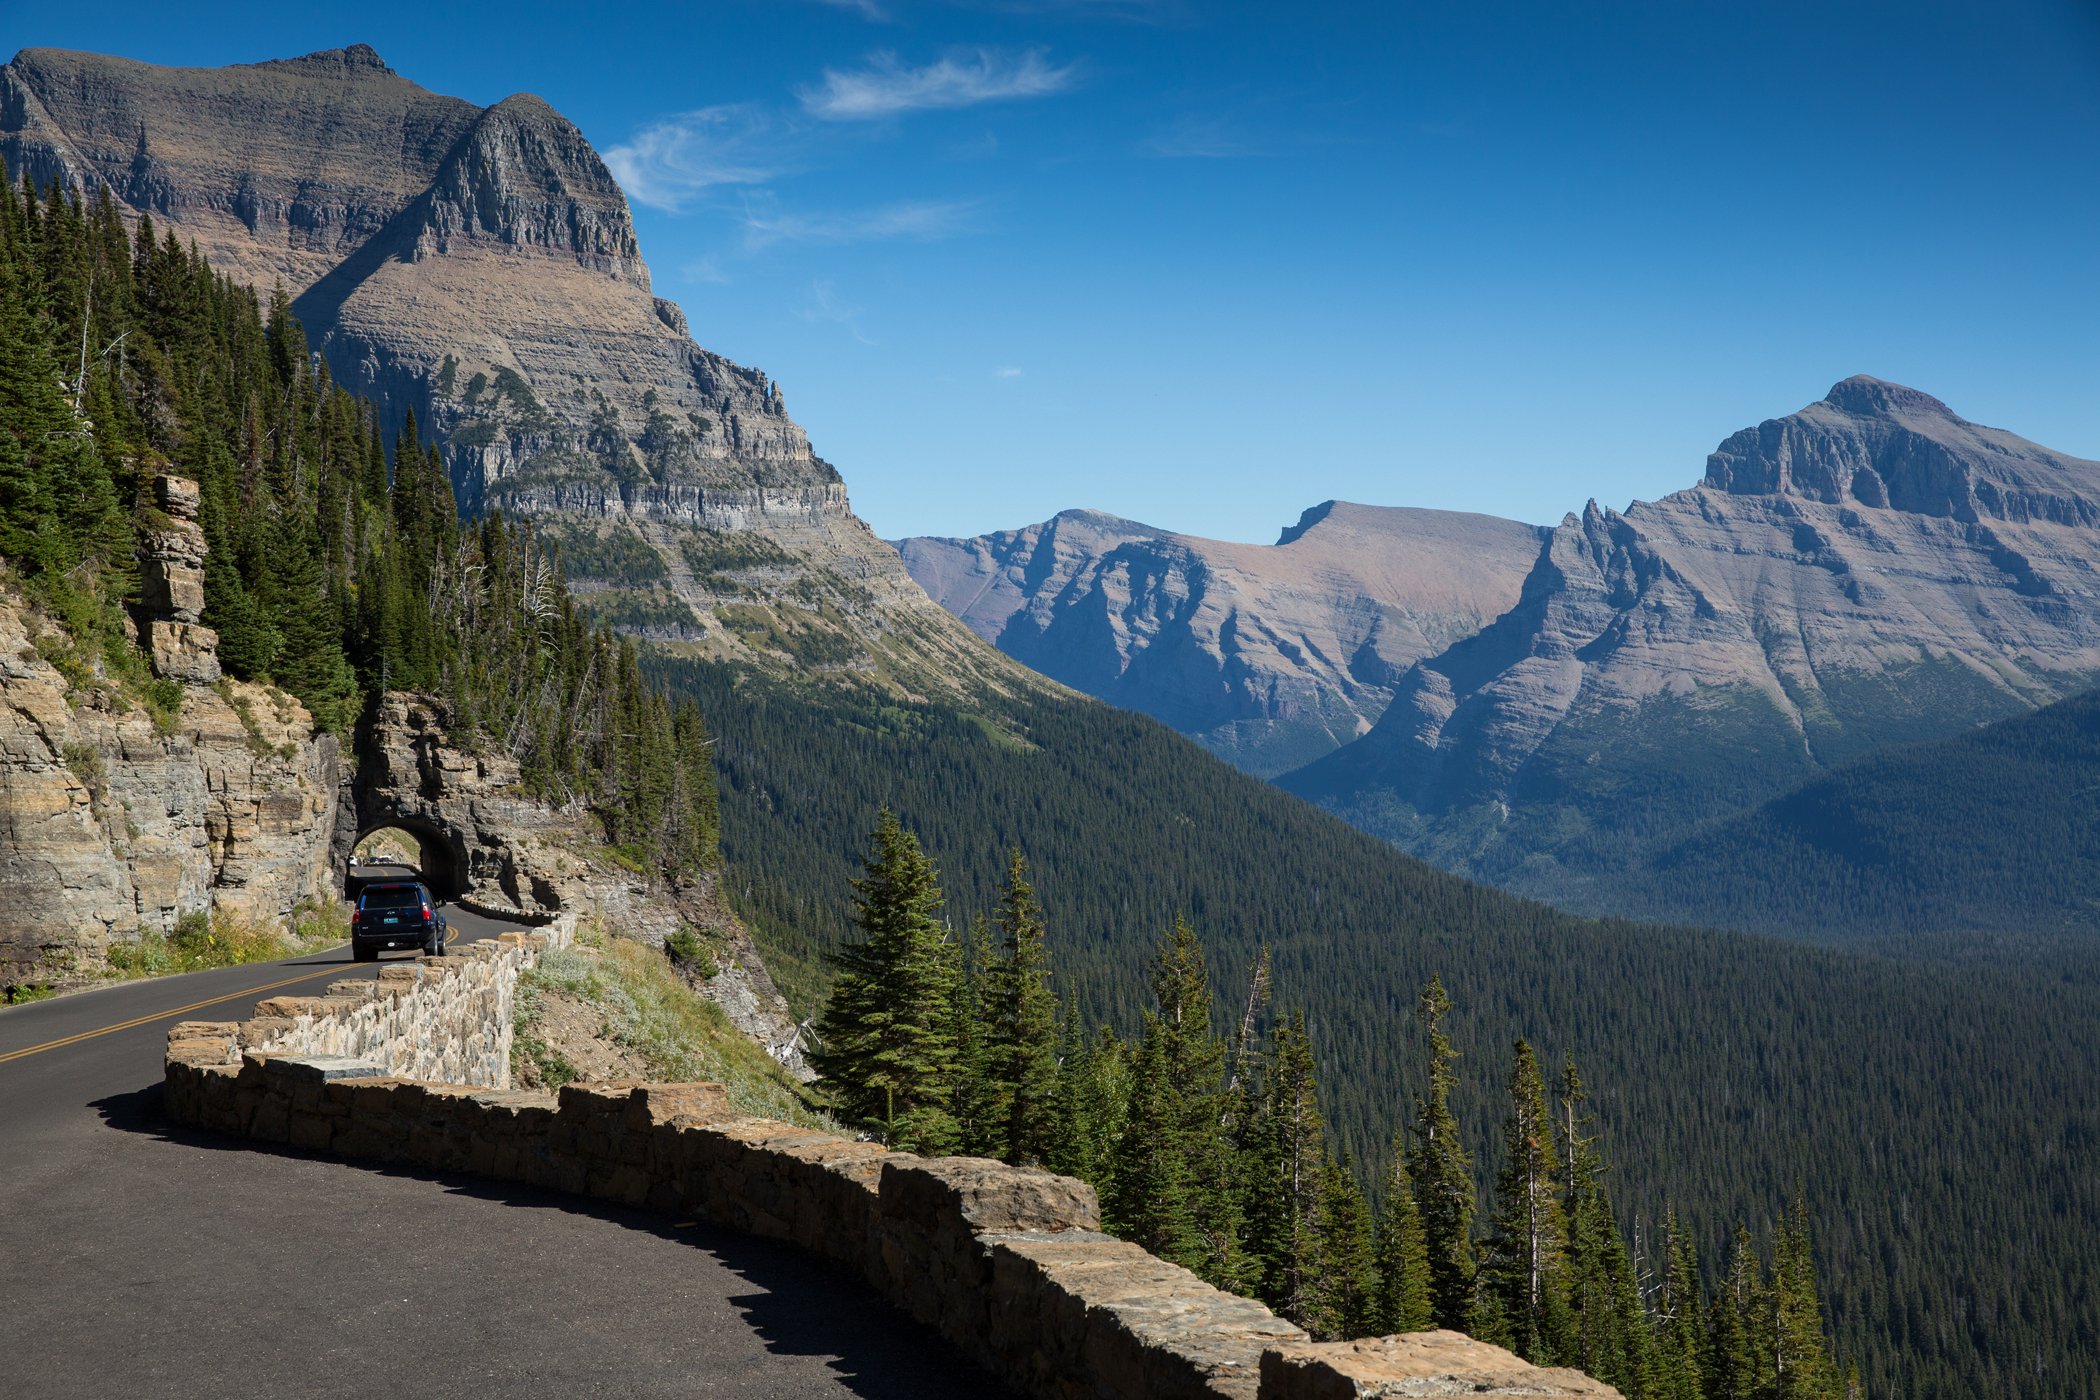 Road Trips: Best Scenic Drives in the National Parks